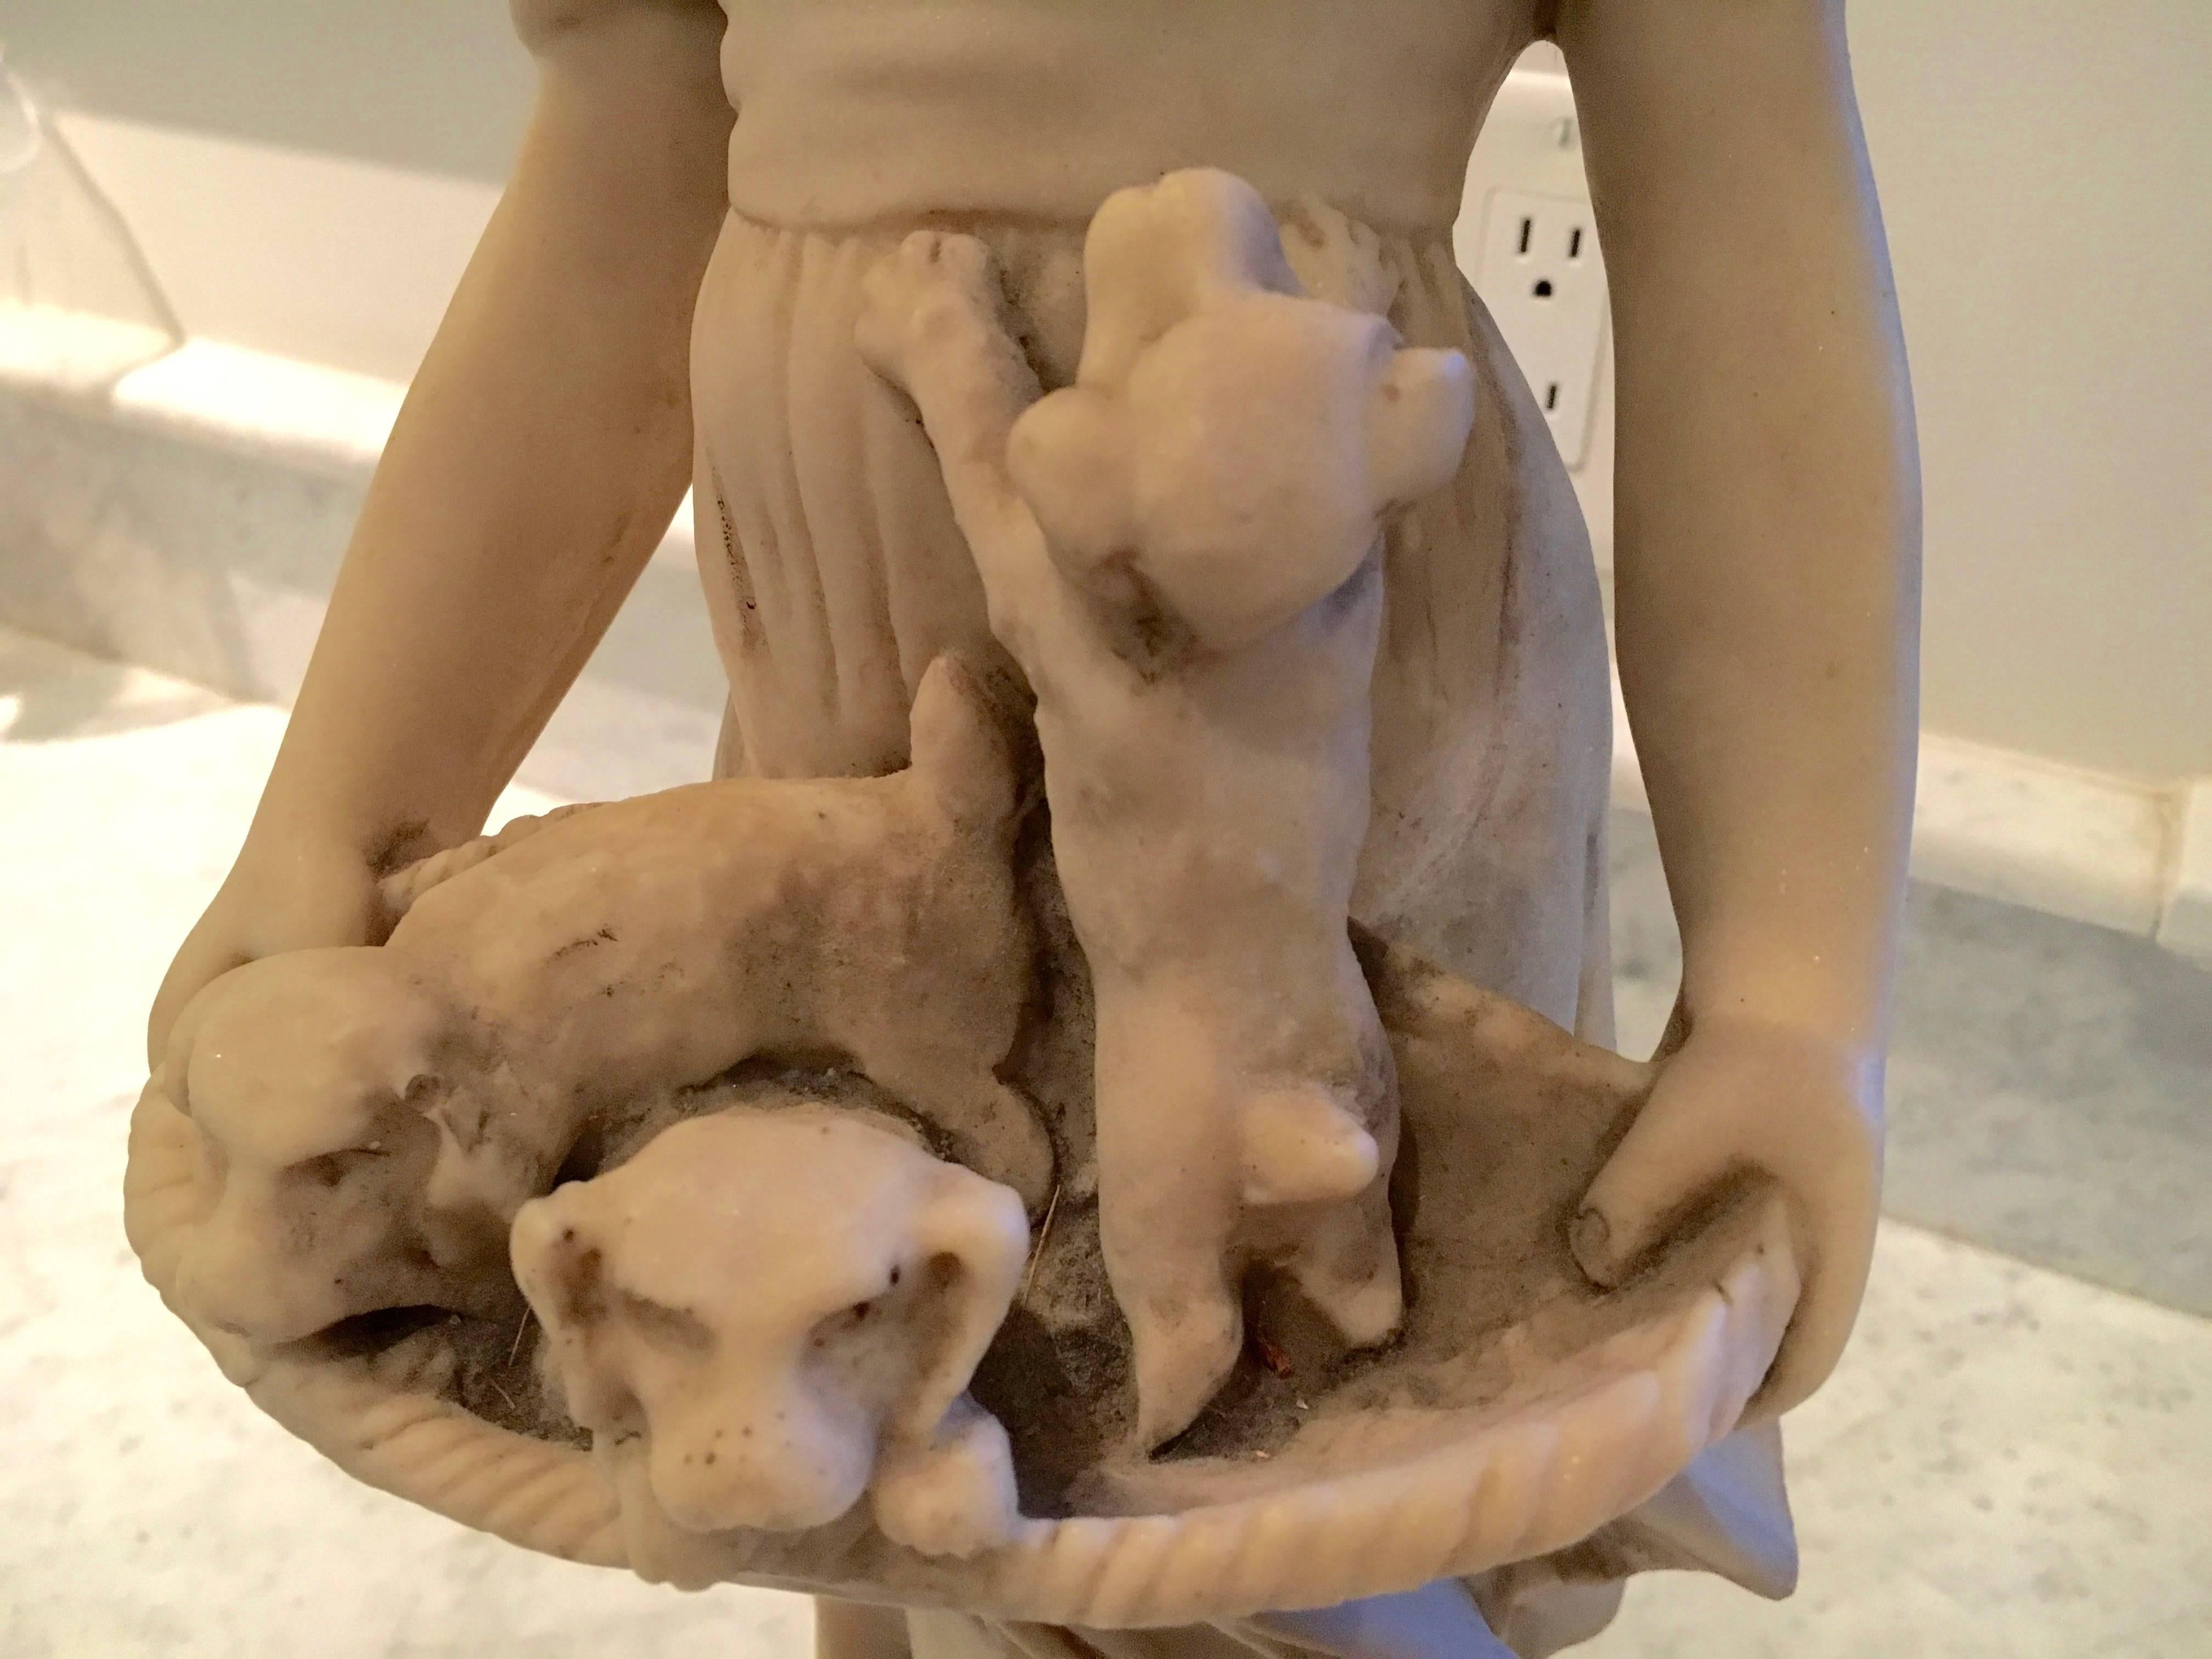 American Charming Sculpture of Girl with Puppies